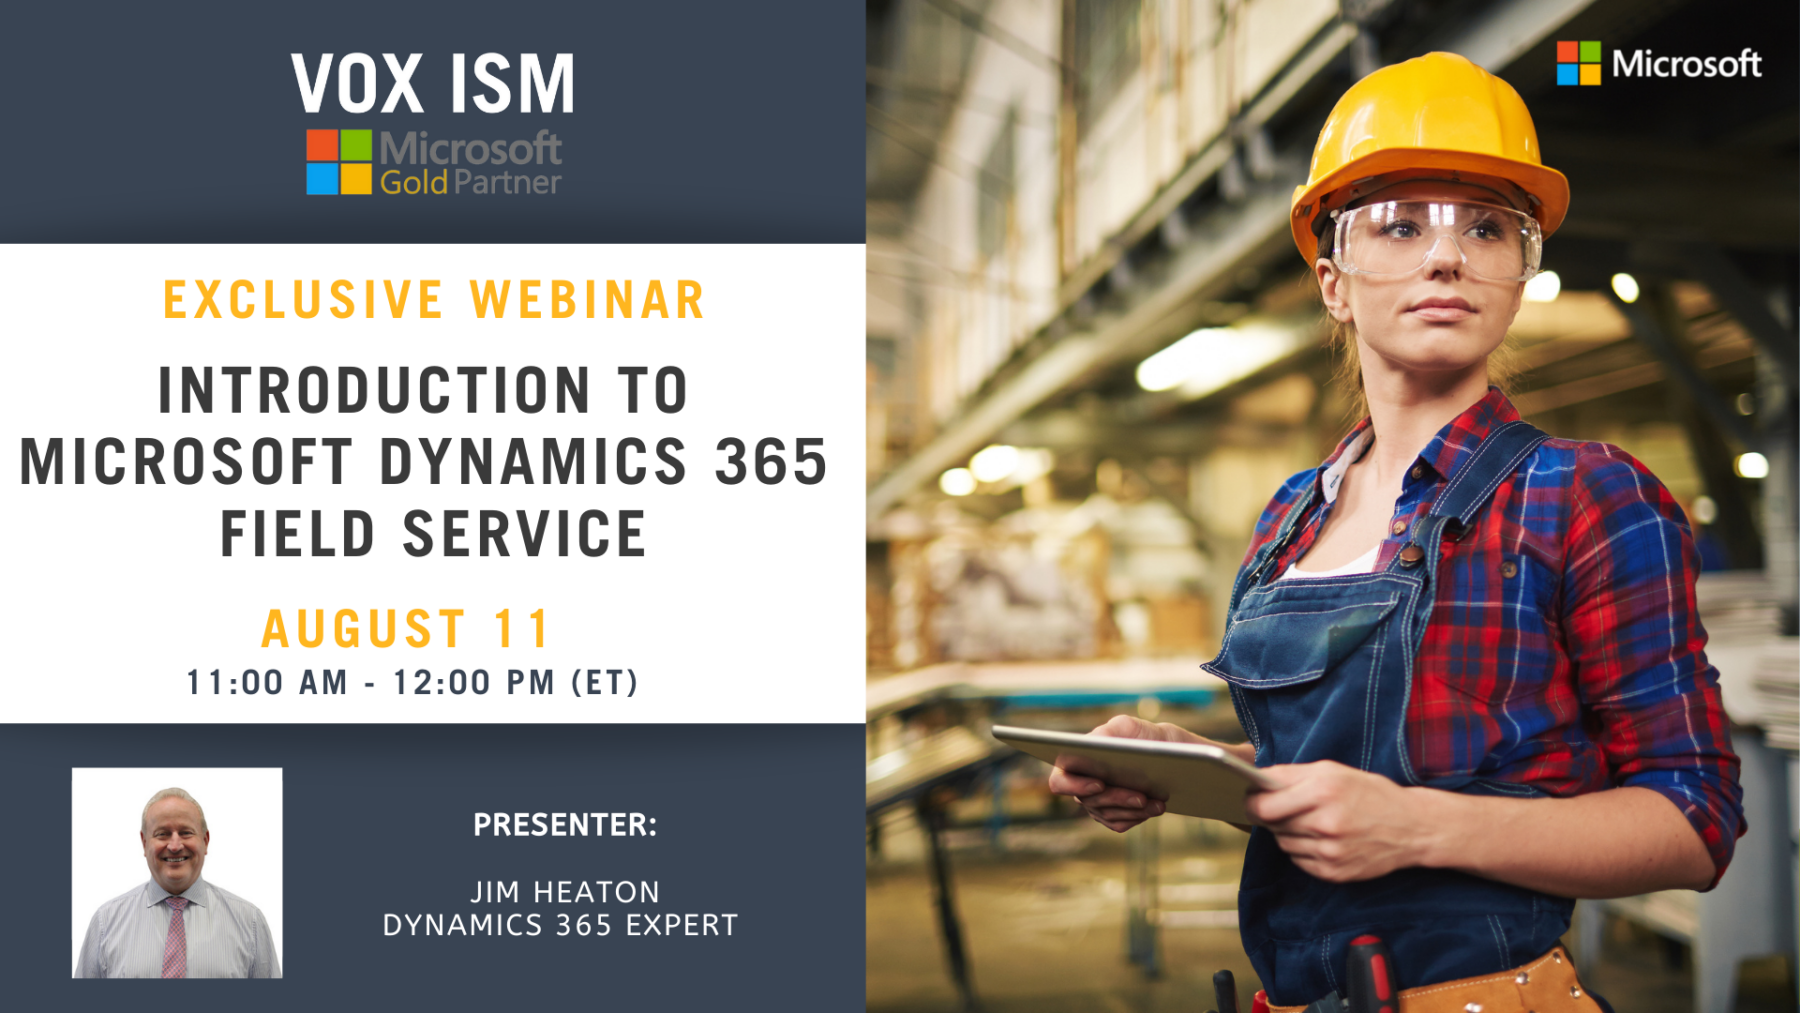 Introduction to Dynamics 365 Field Service - August 11 - Webinar